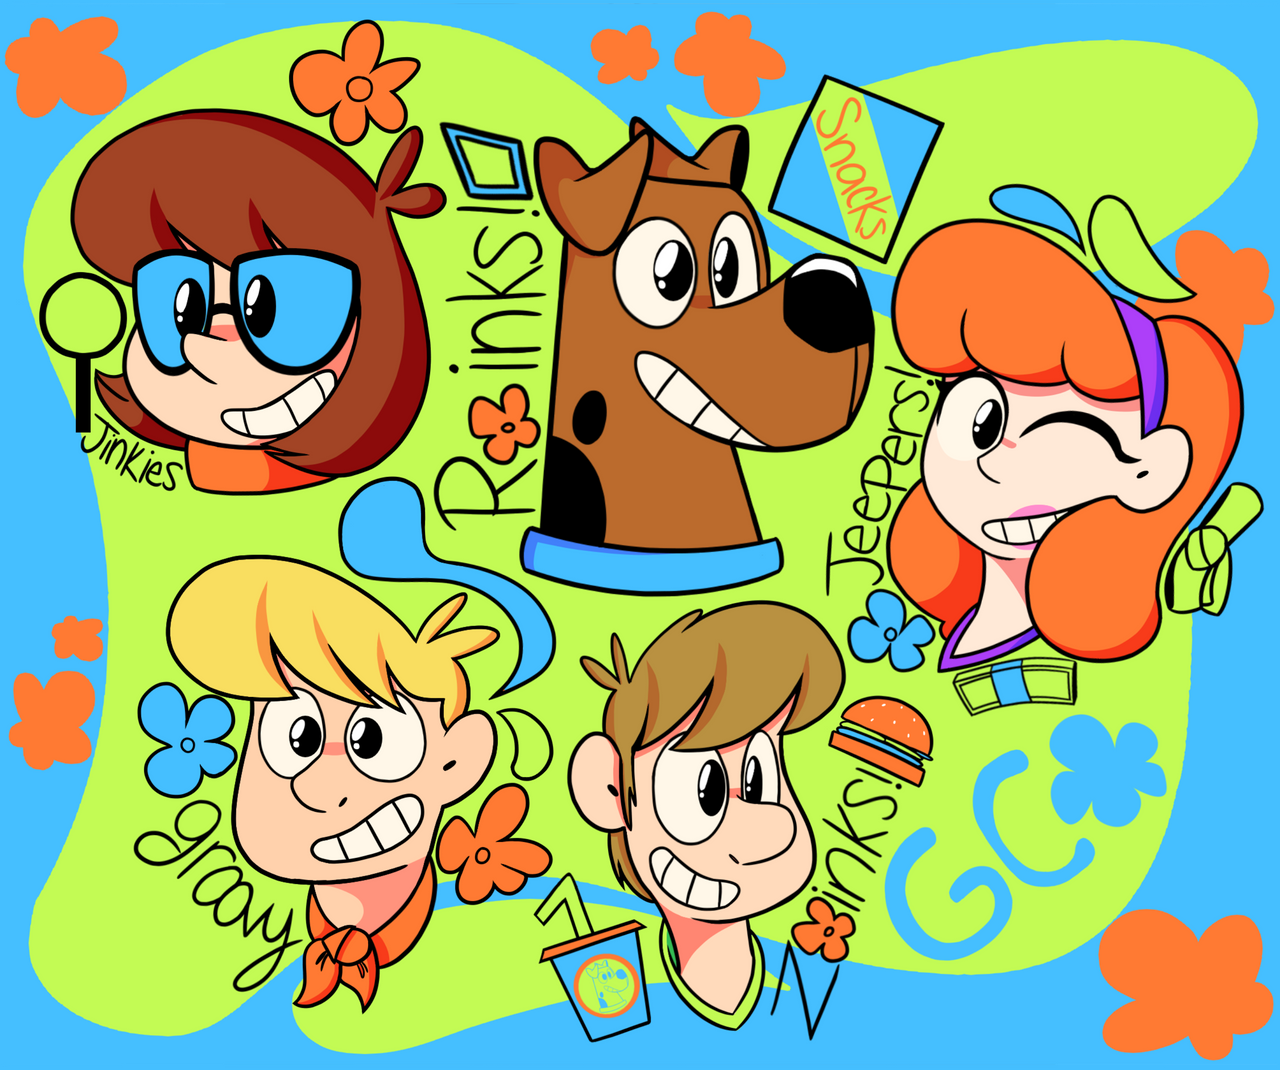 Scooby Dooby Doo, Where are you? by Trollan-gurl22 on DeviantArt